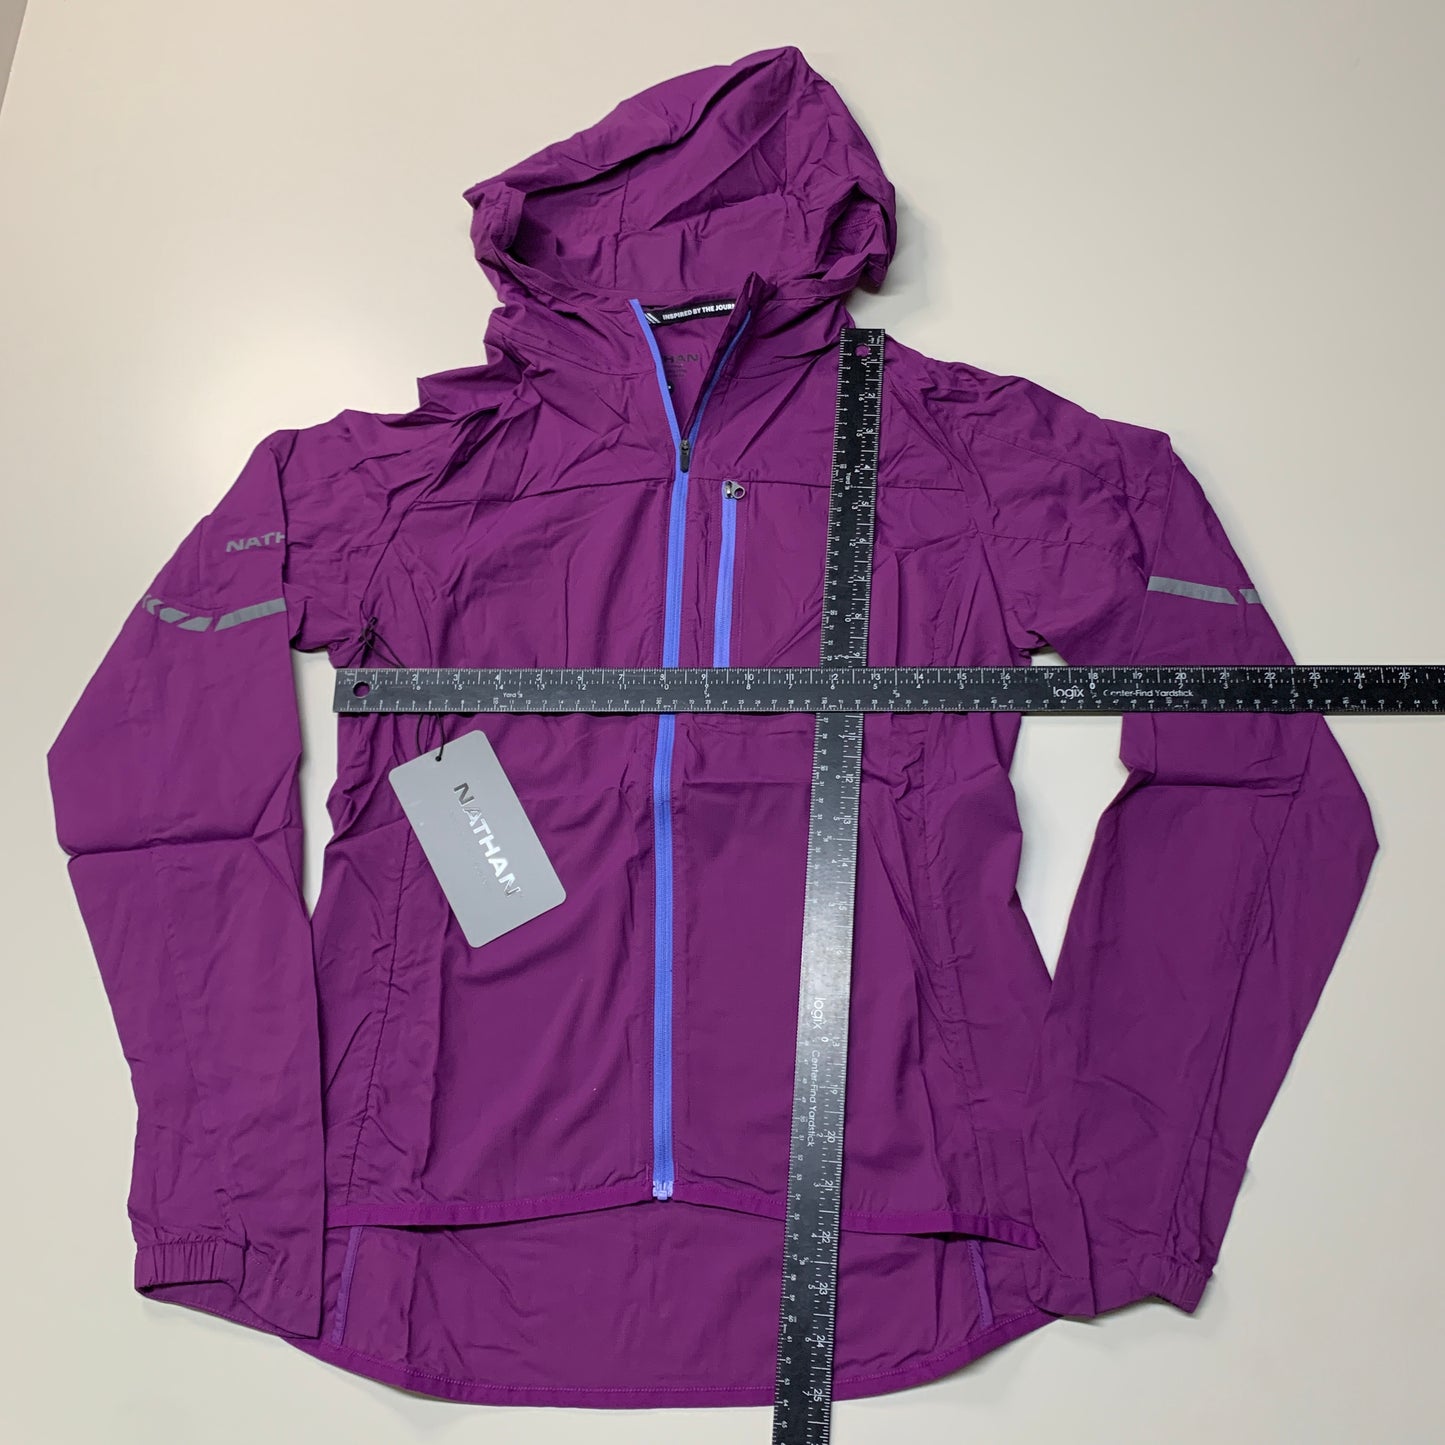 NATHAN Stealth Jacket W/ Hood Women's Plum Size Small NS90080-70030-S